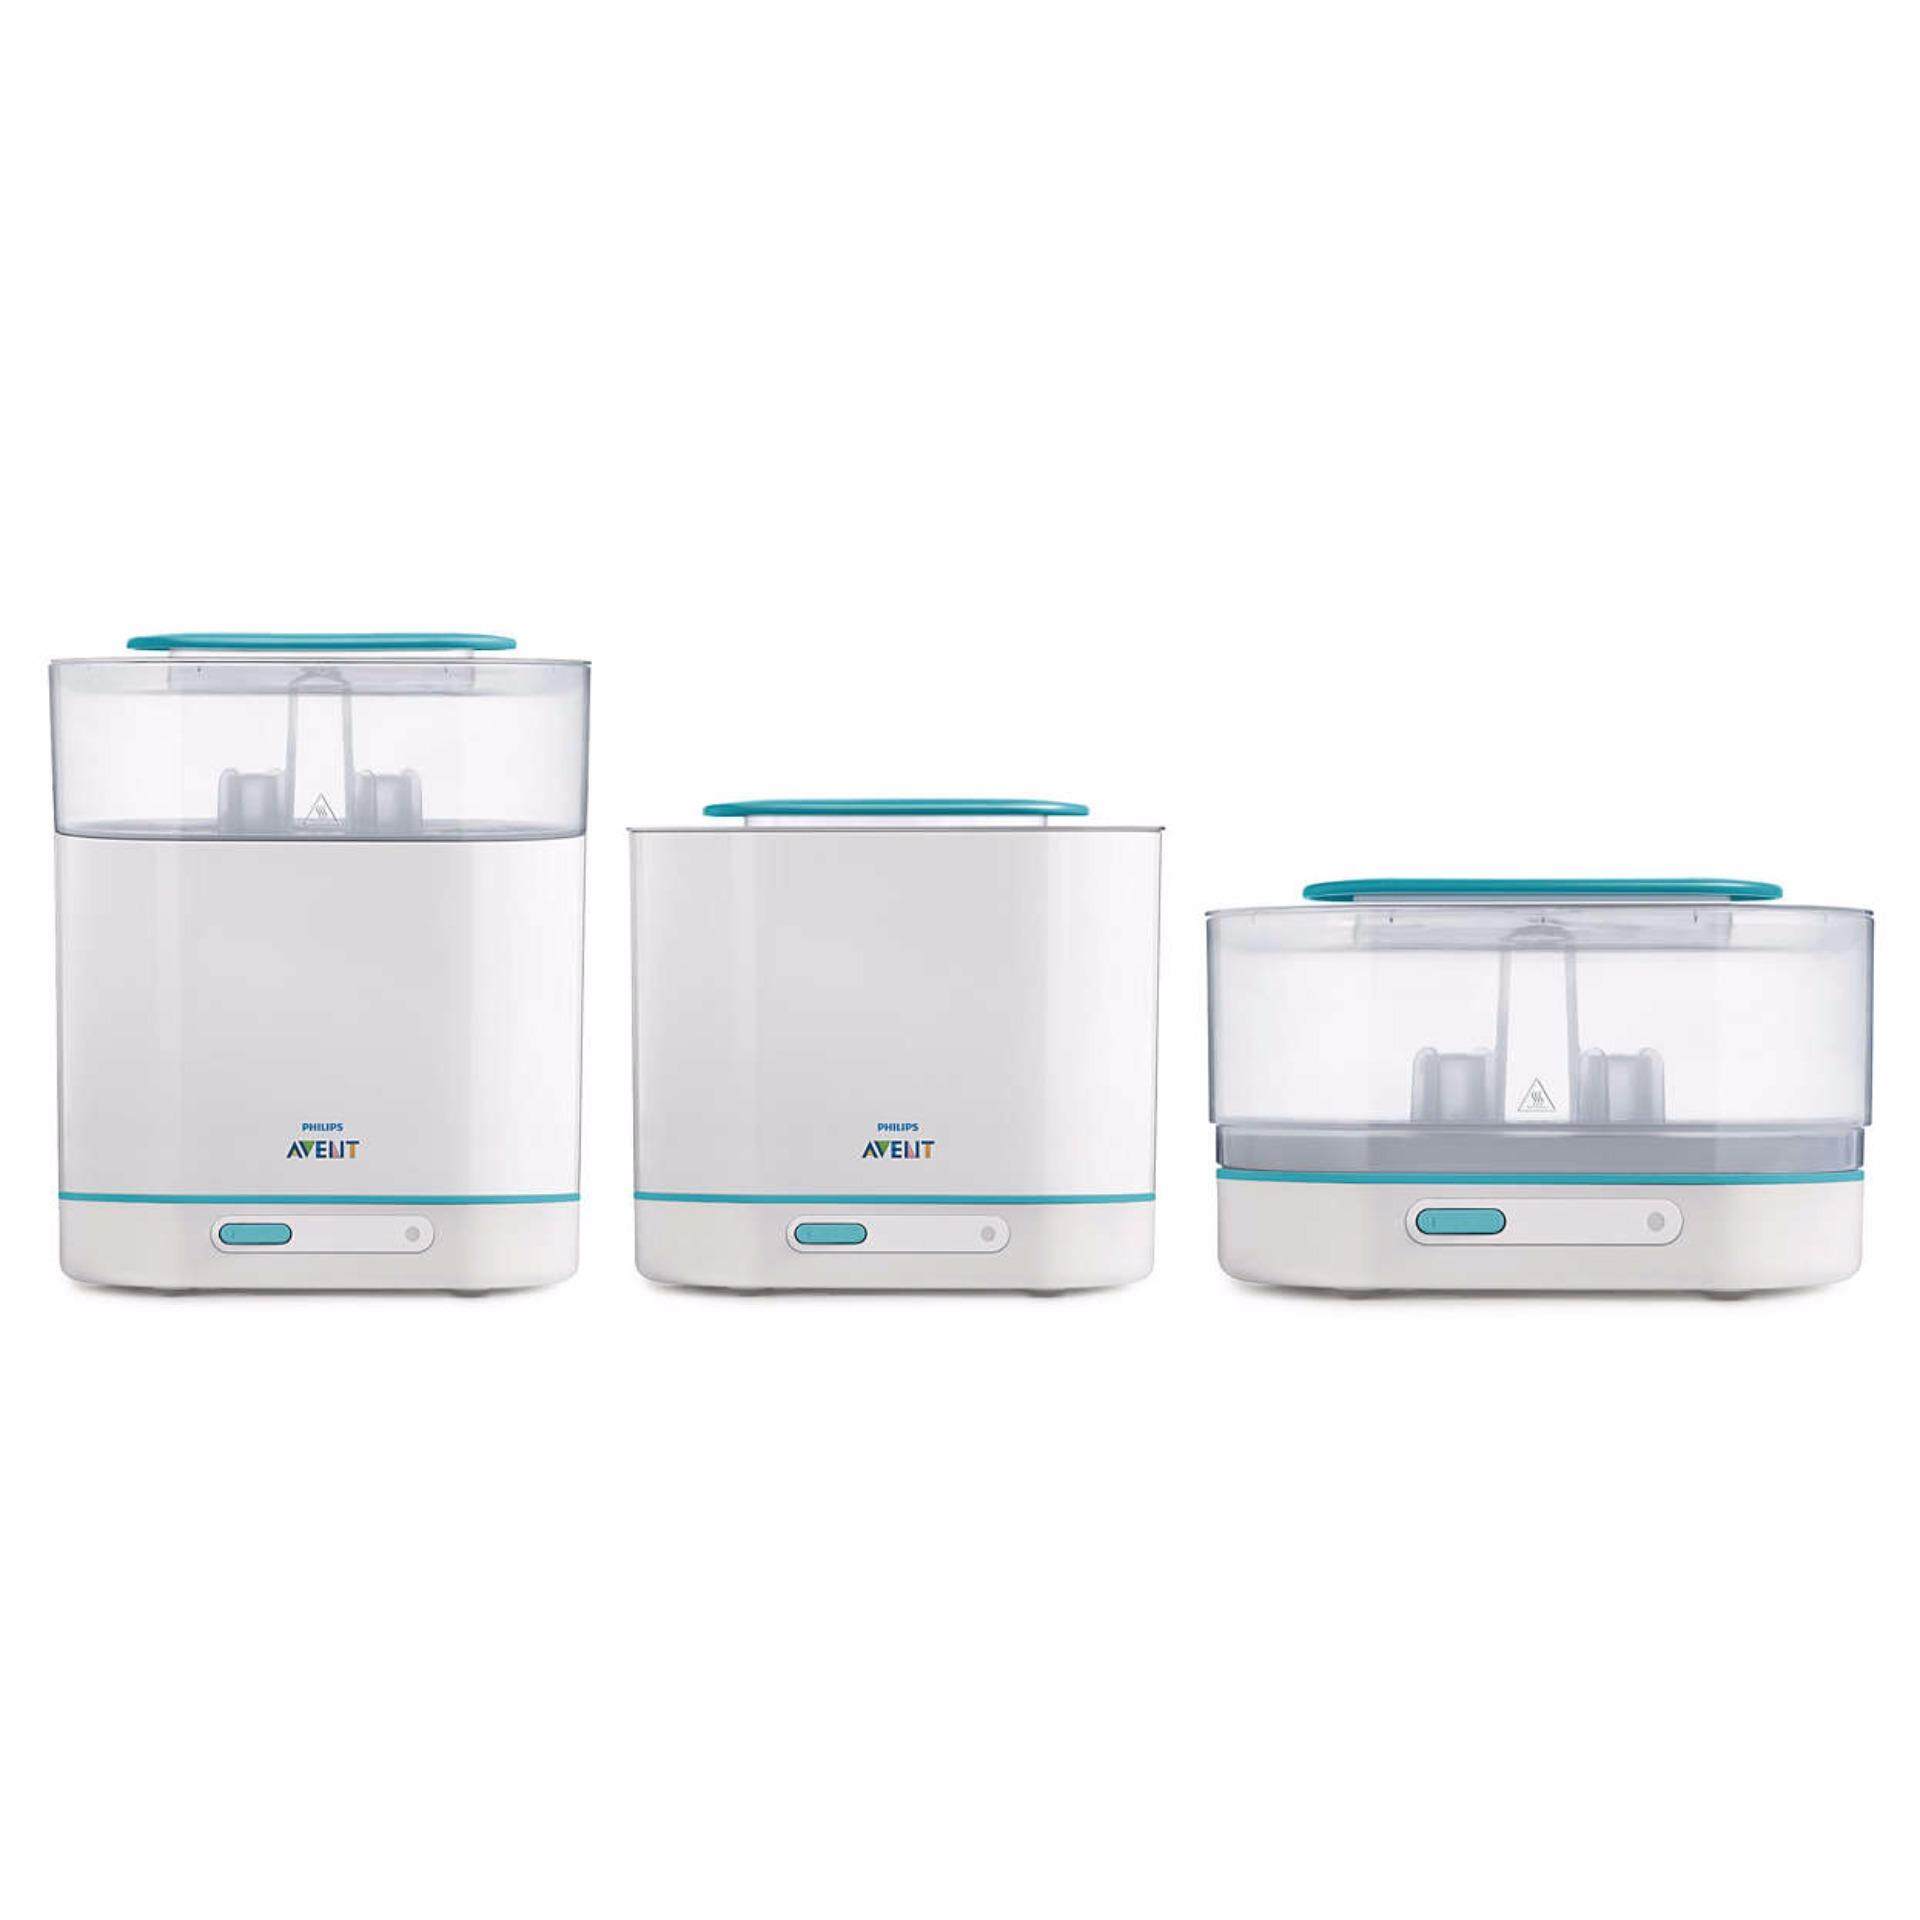 avent 4 in 1 sterilizer instructions